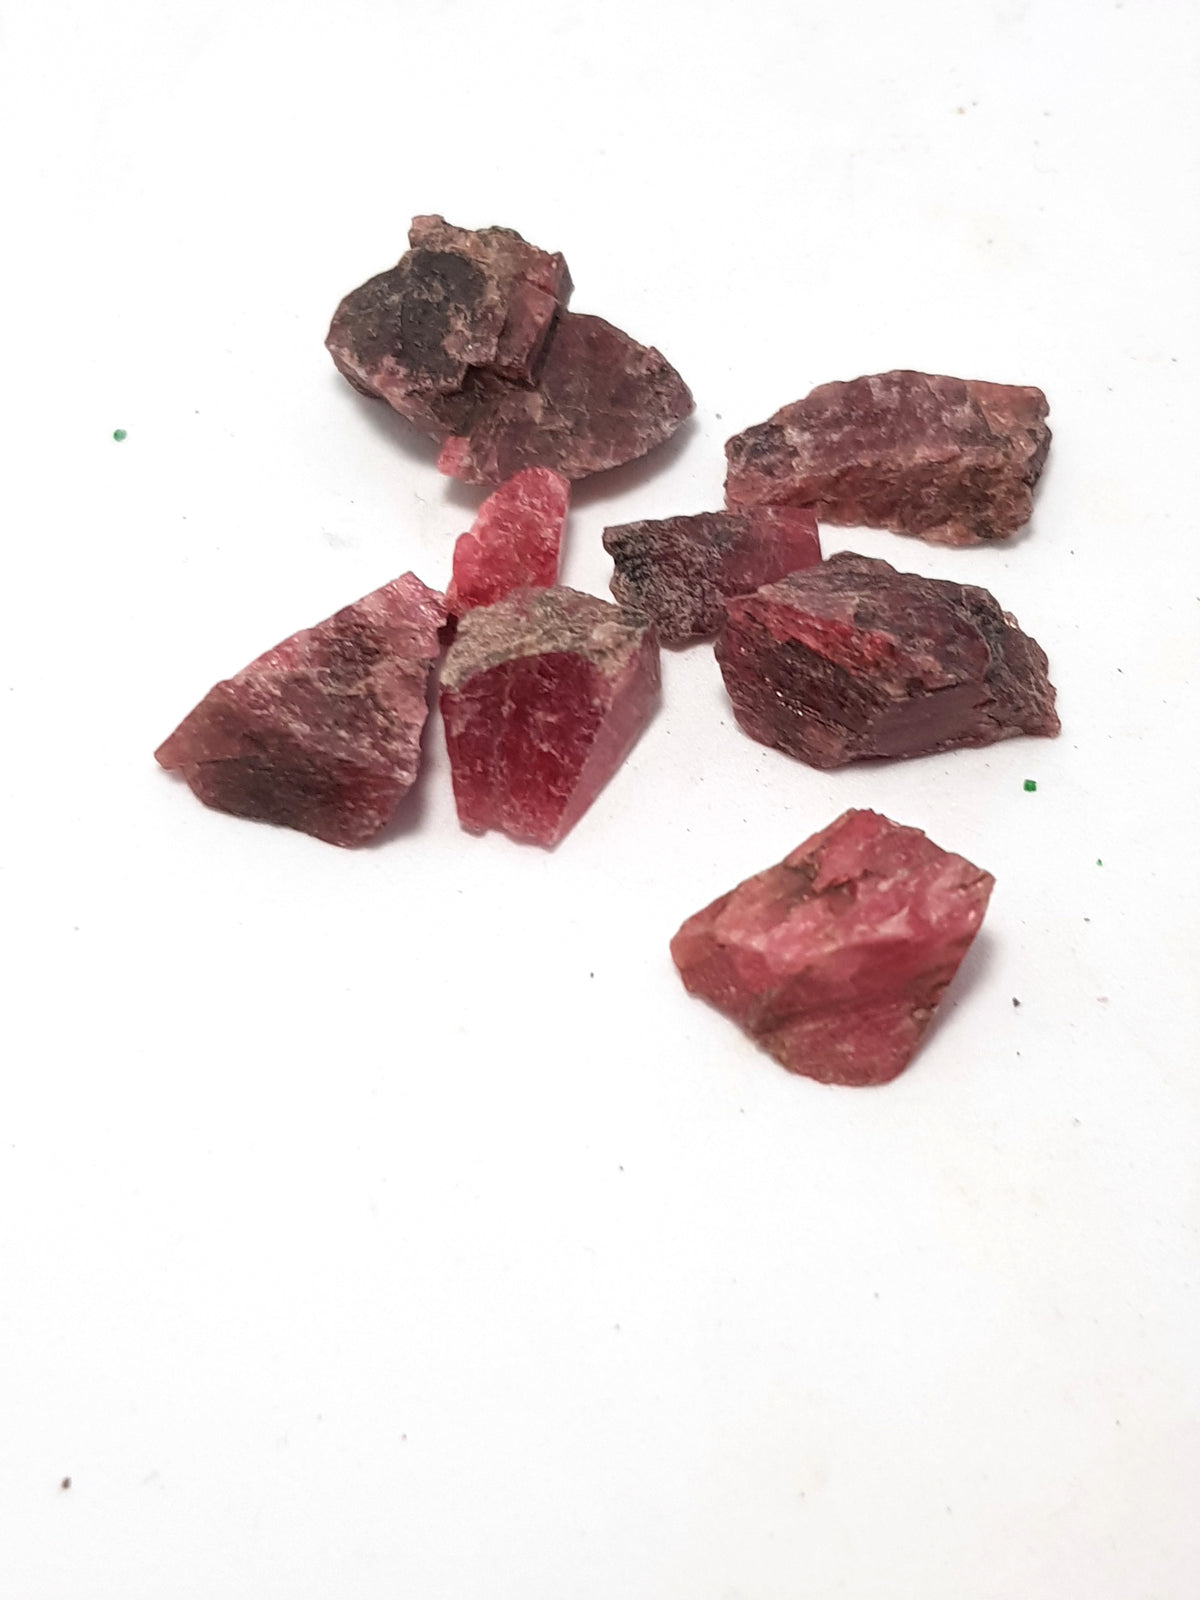 raw chips of rhodonite. They are a very dark pink.